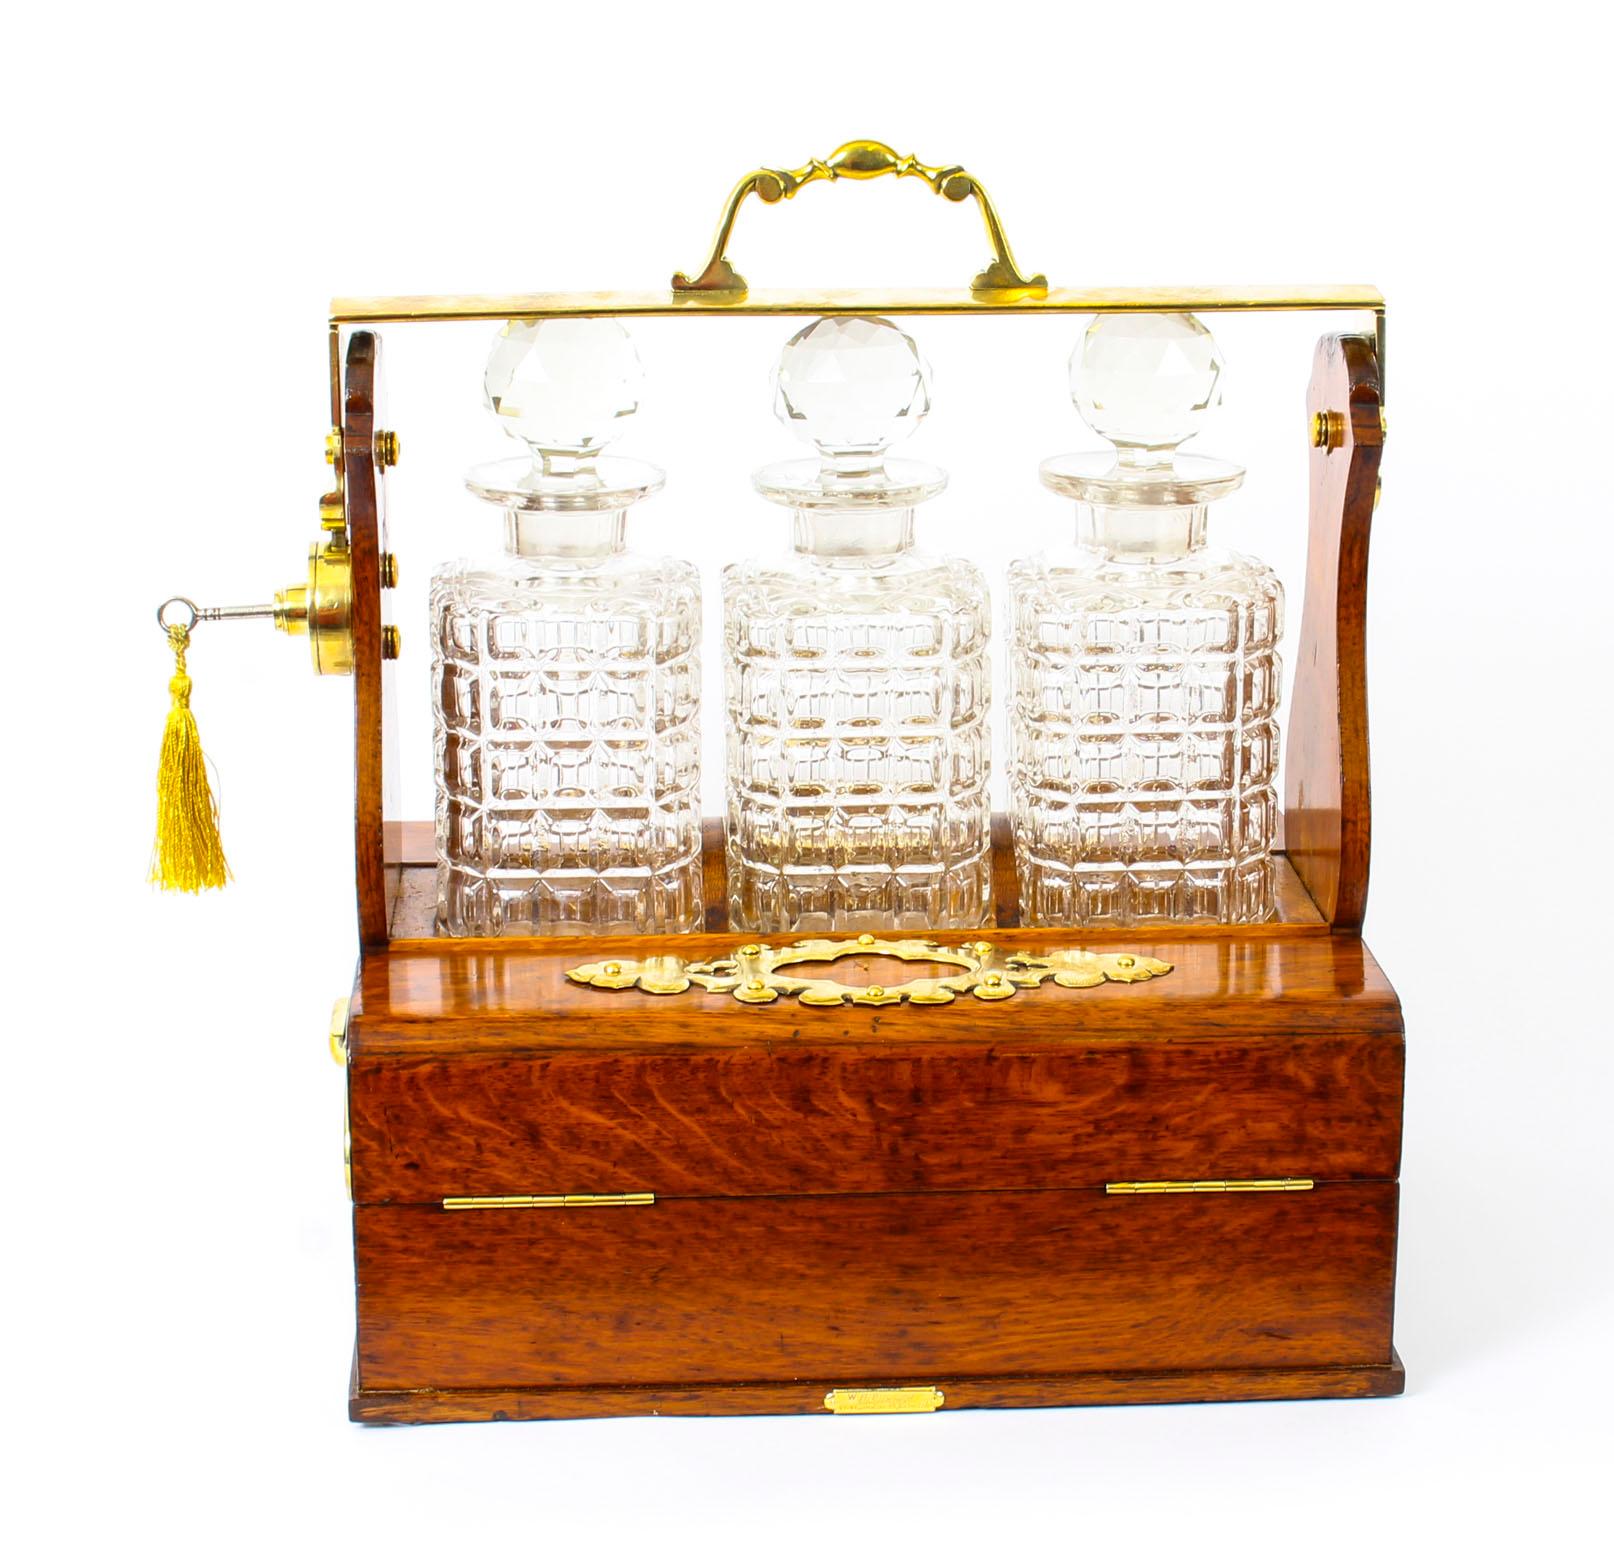 This is a superb antique Victorian Betjemans oak cased three decanter tantalus and humidor, late 19th century in date.

It was skillfully crafted in tiger oak with beautiful brass mounts and stylish handles. The locking swing brass handle above